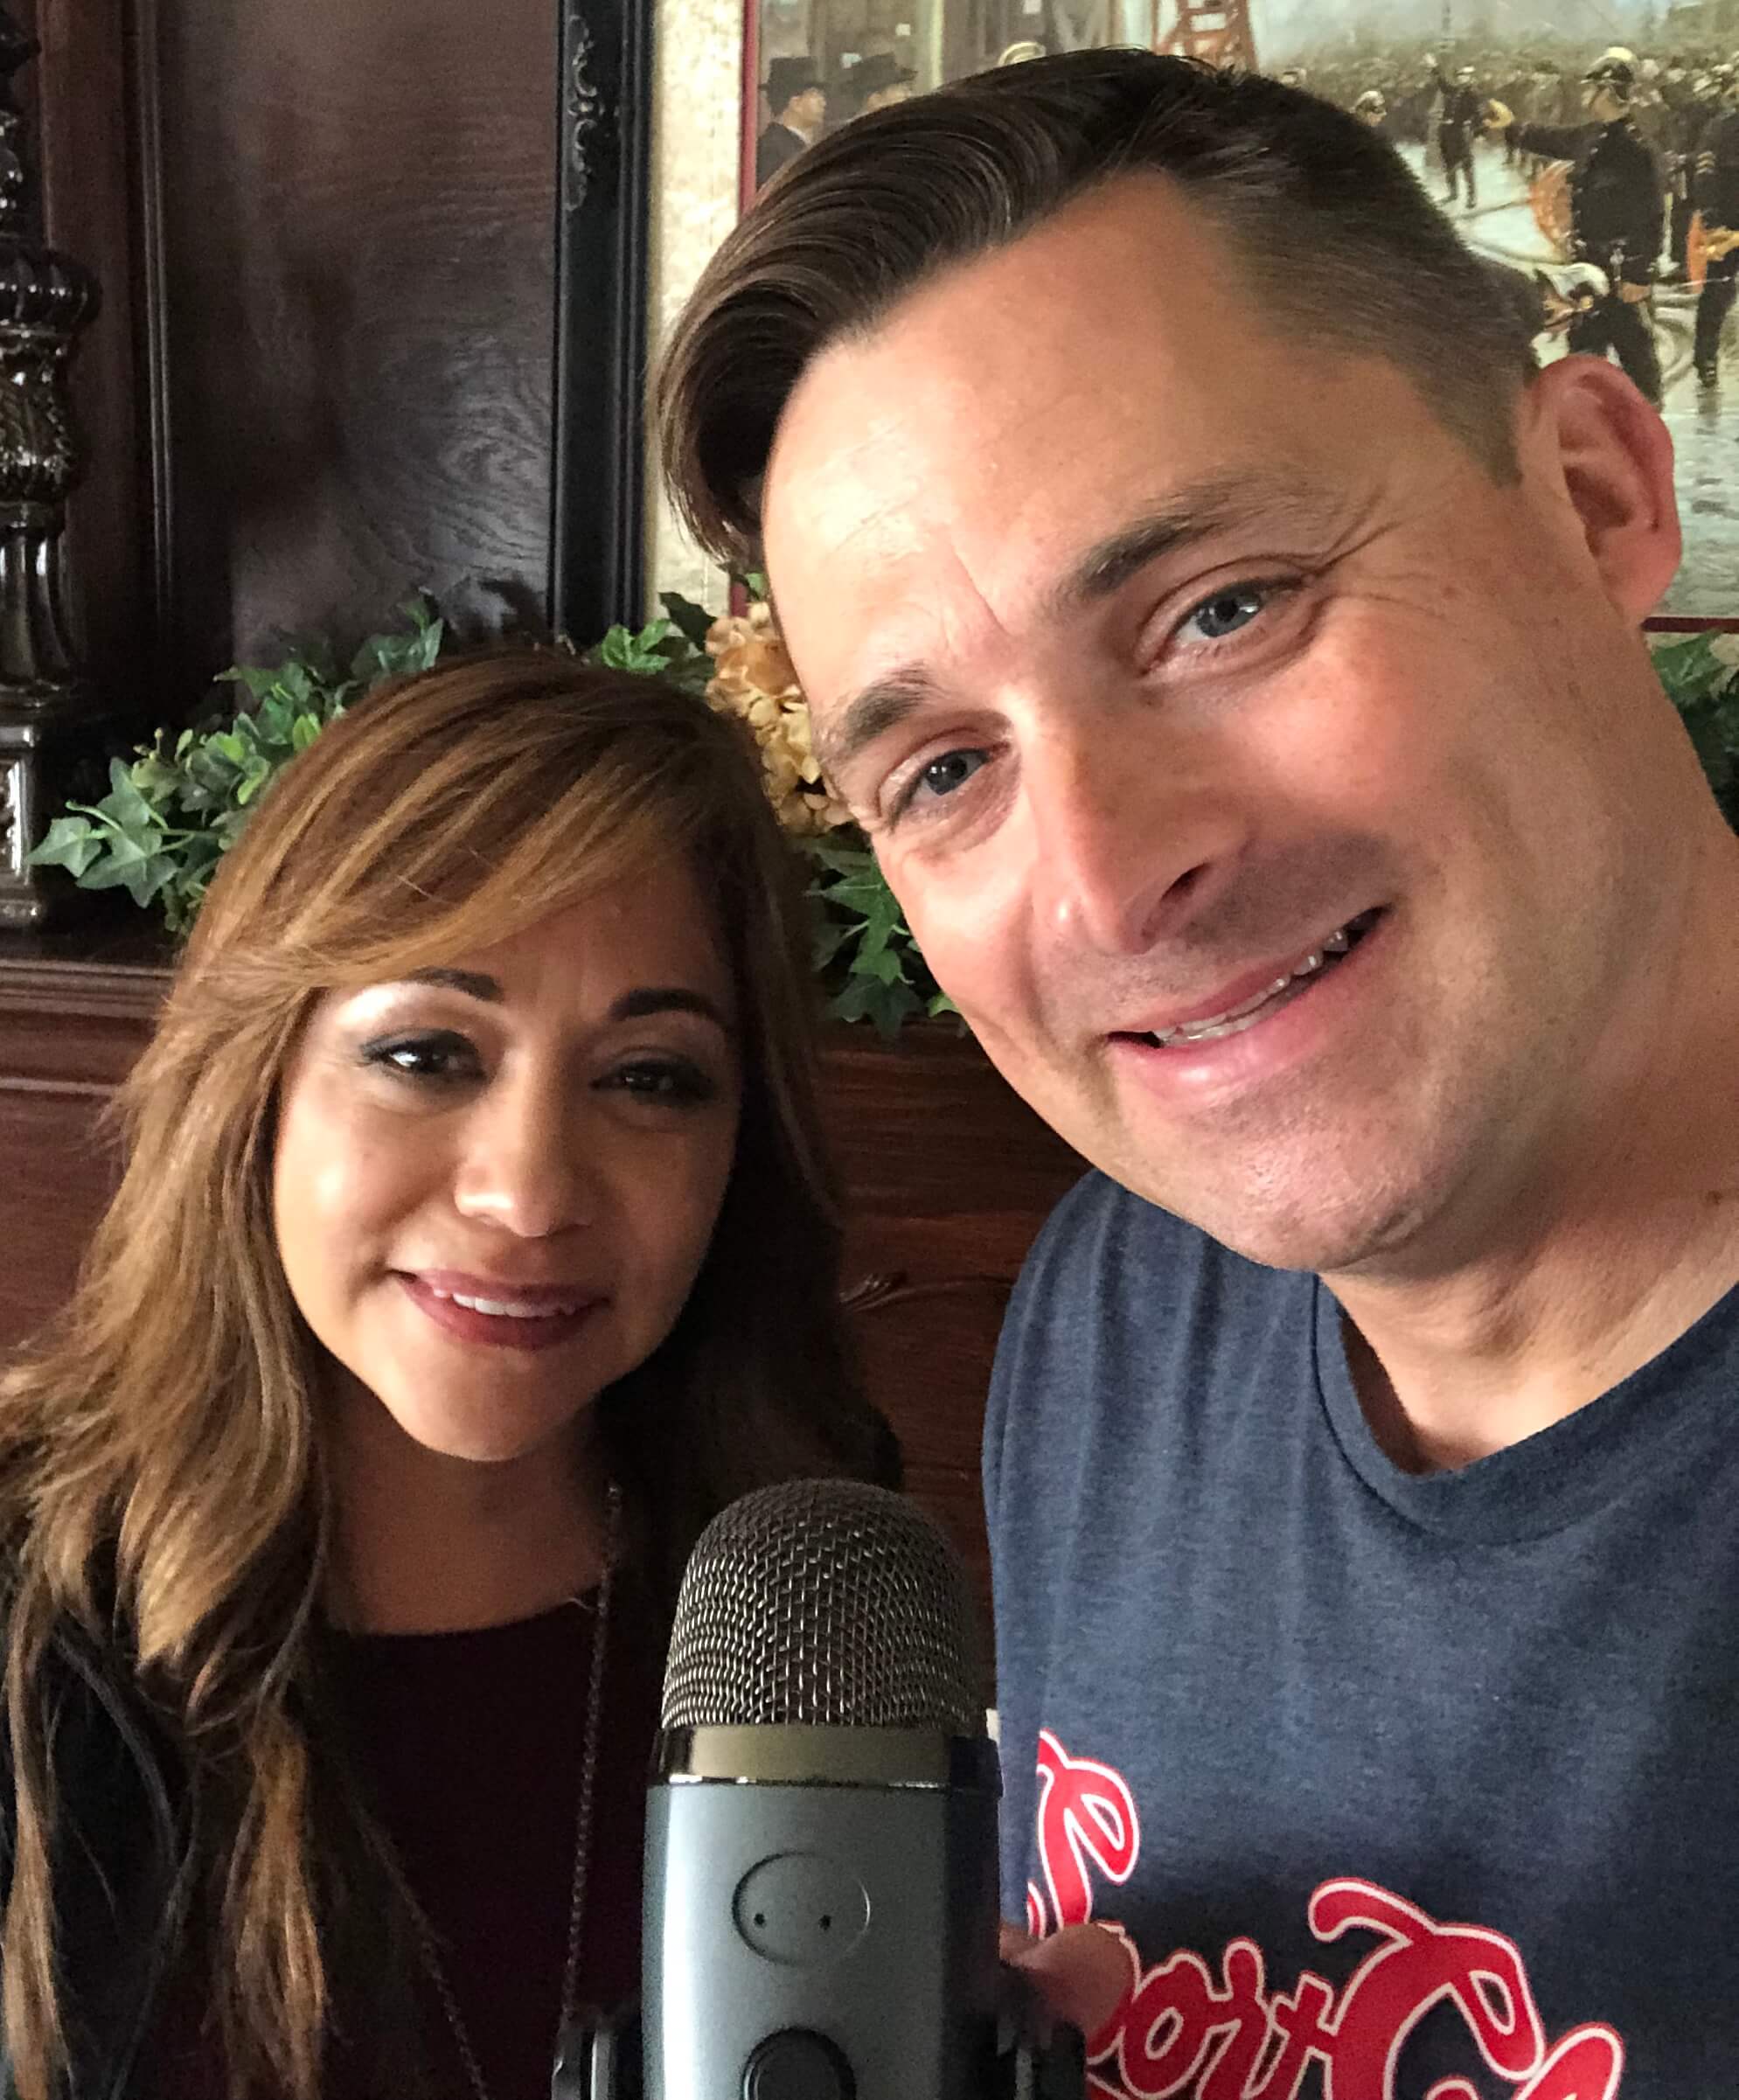 Chad Jordan and Barbara Montes holding a microphone